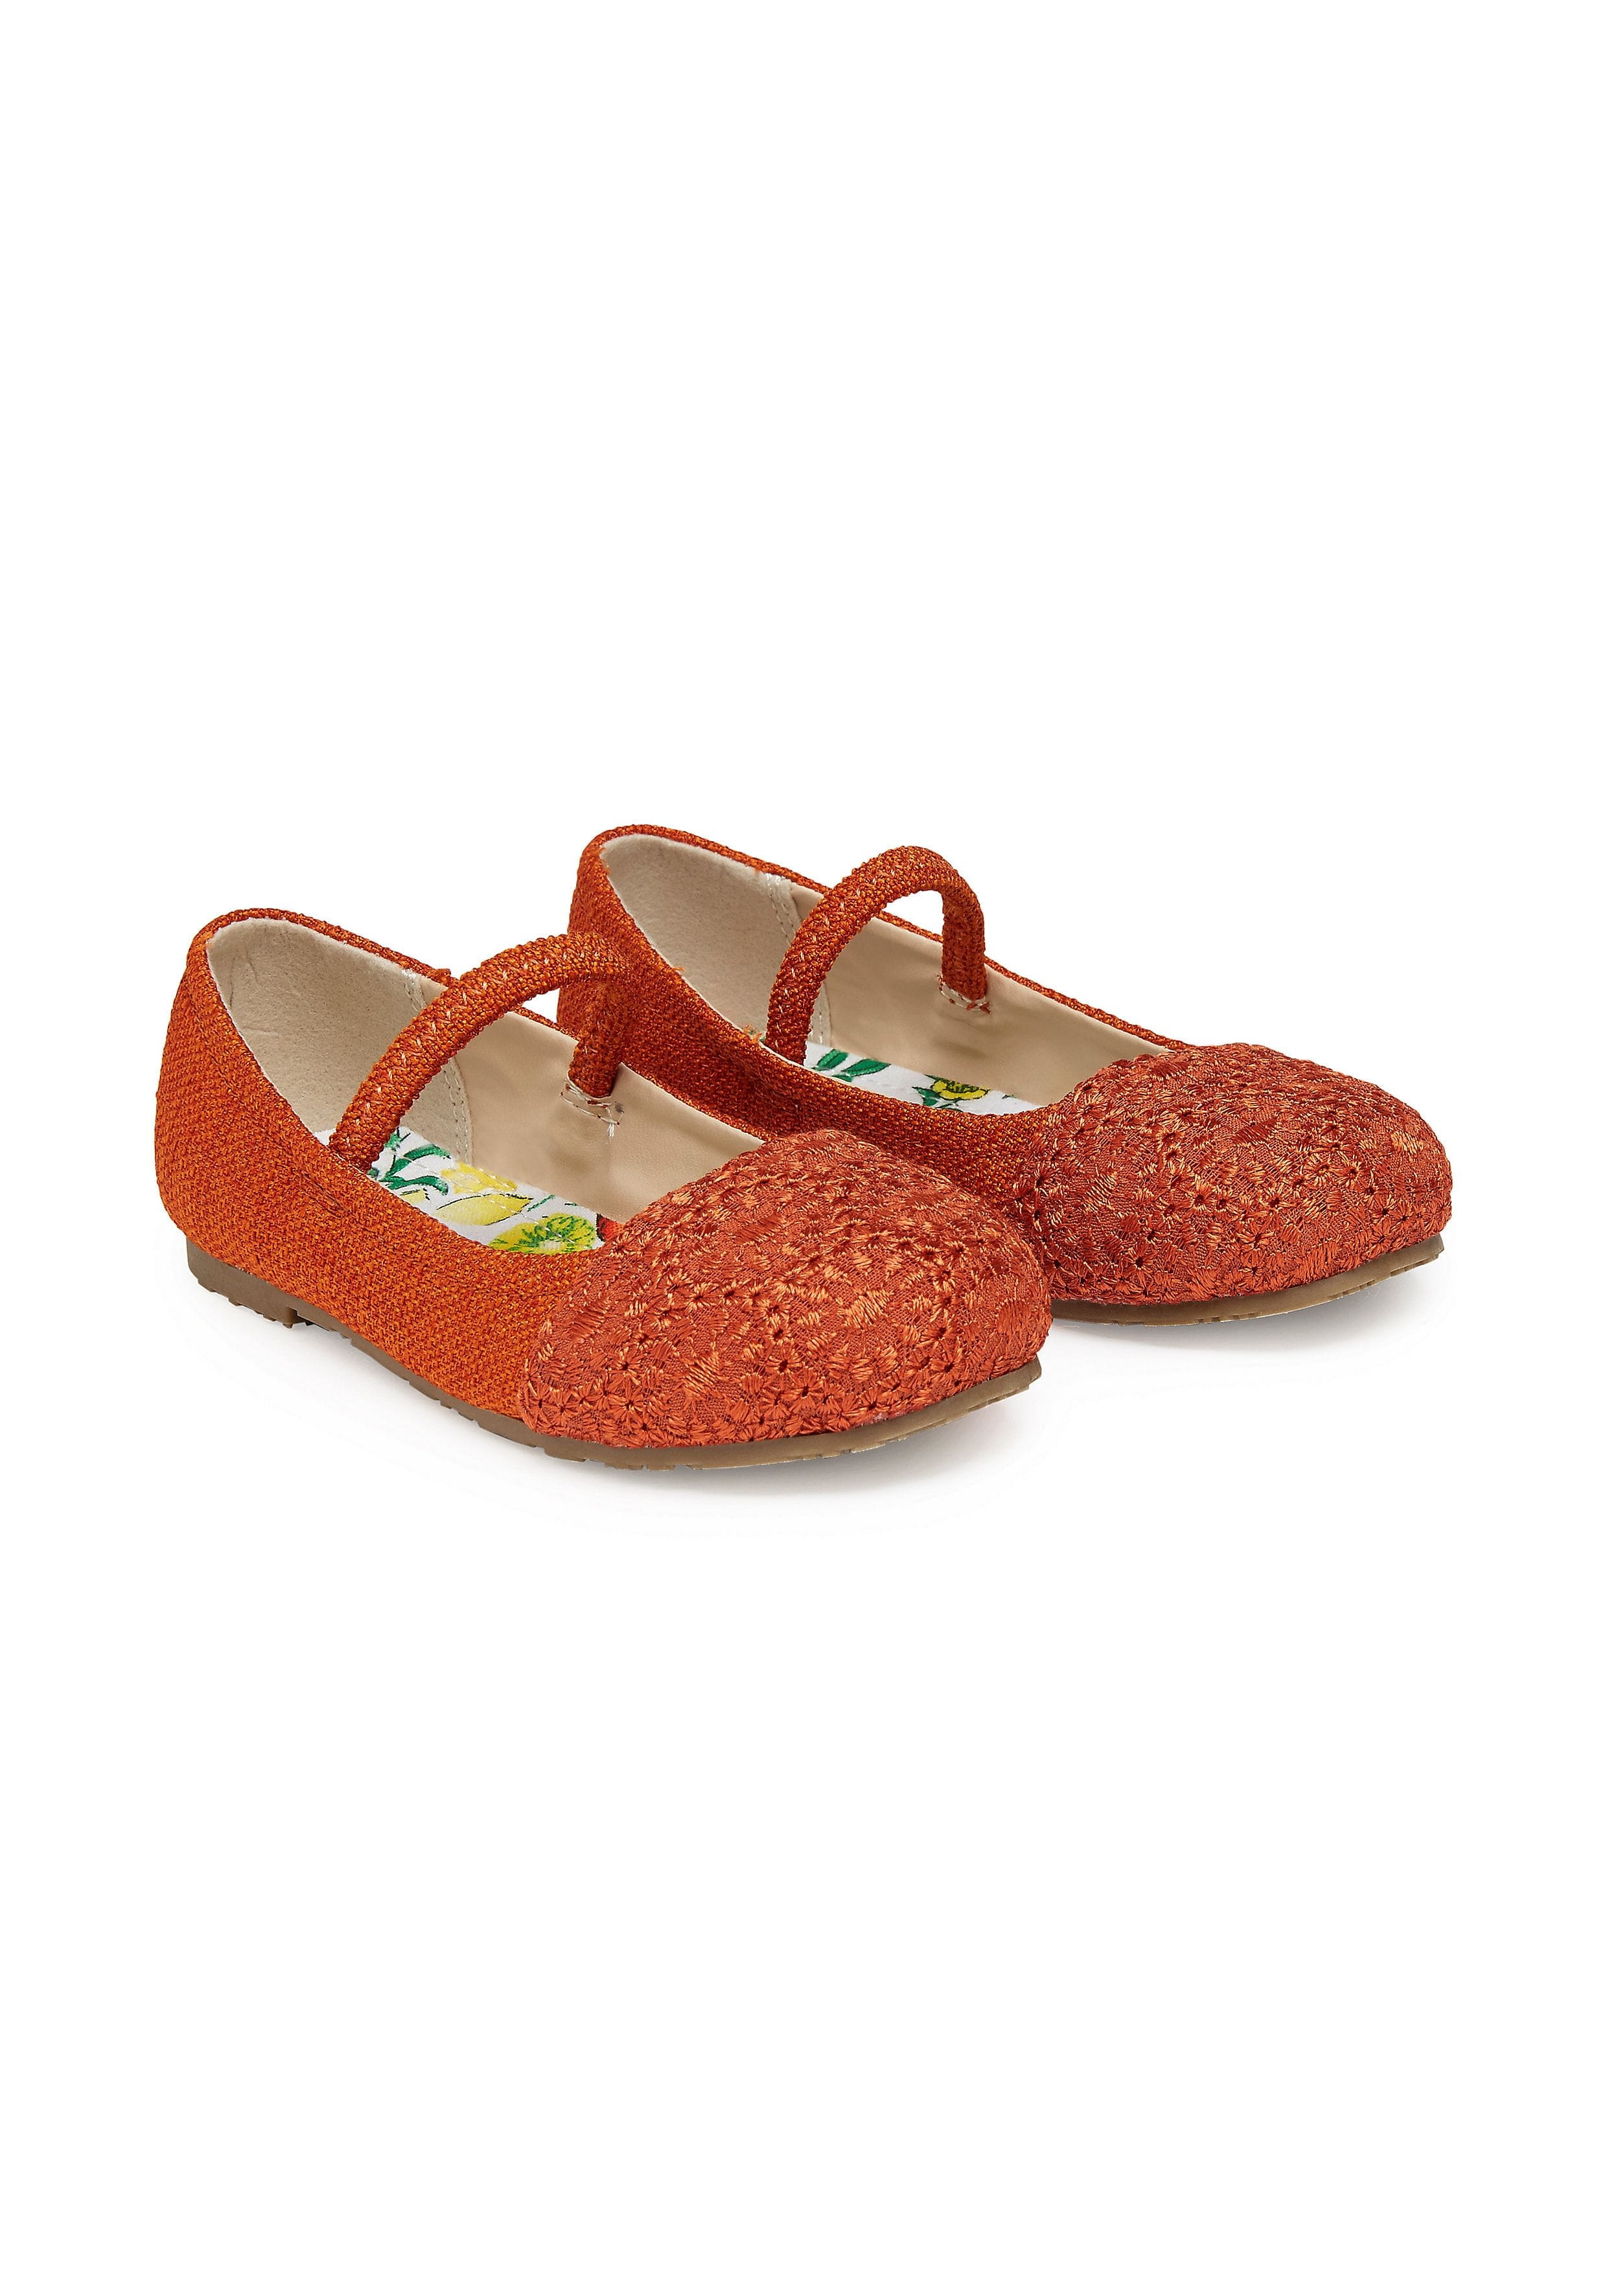 Mothercare | Girls Broderie Shoes - Orange 0